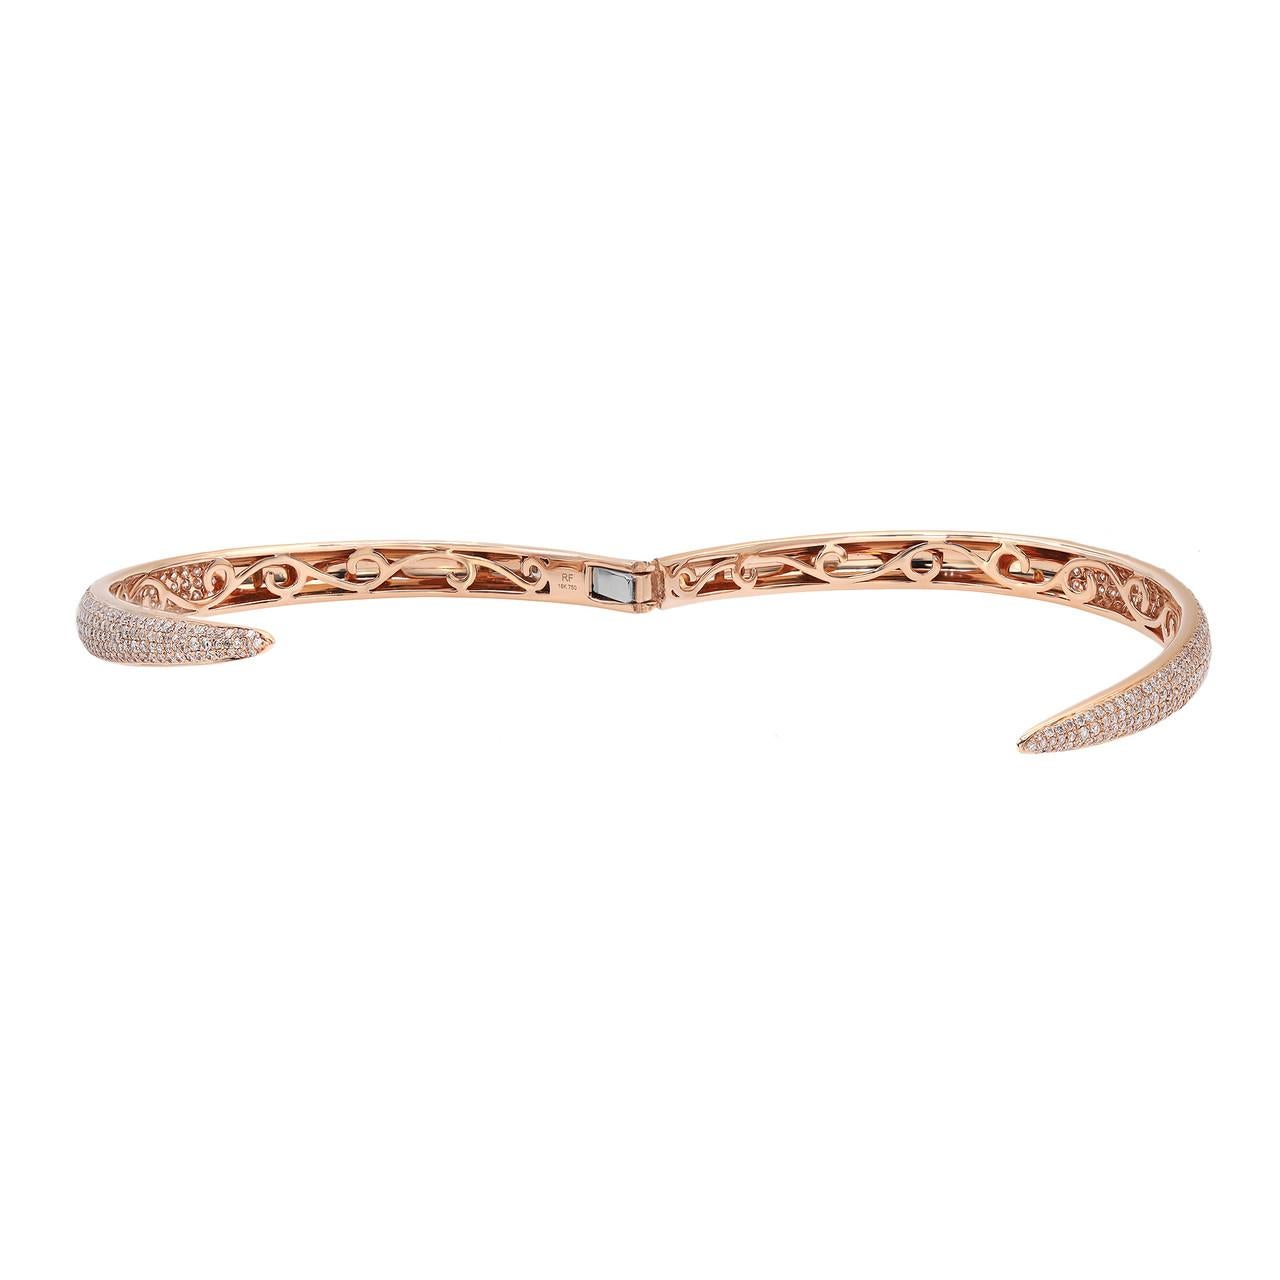 3.02 Carat Pave Set Round Cut Diamond Bangle Bracelet 18K Rose Gold In New Condition For Sale In New York, NY